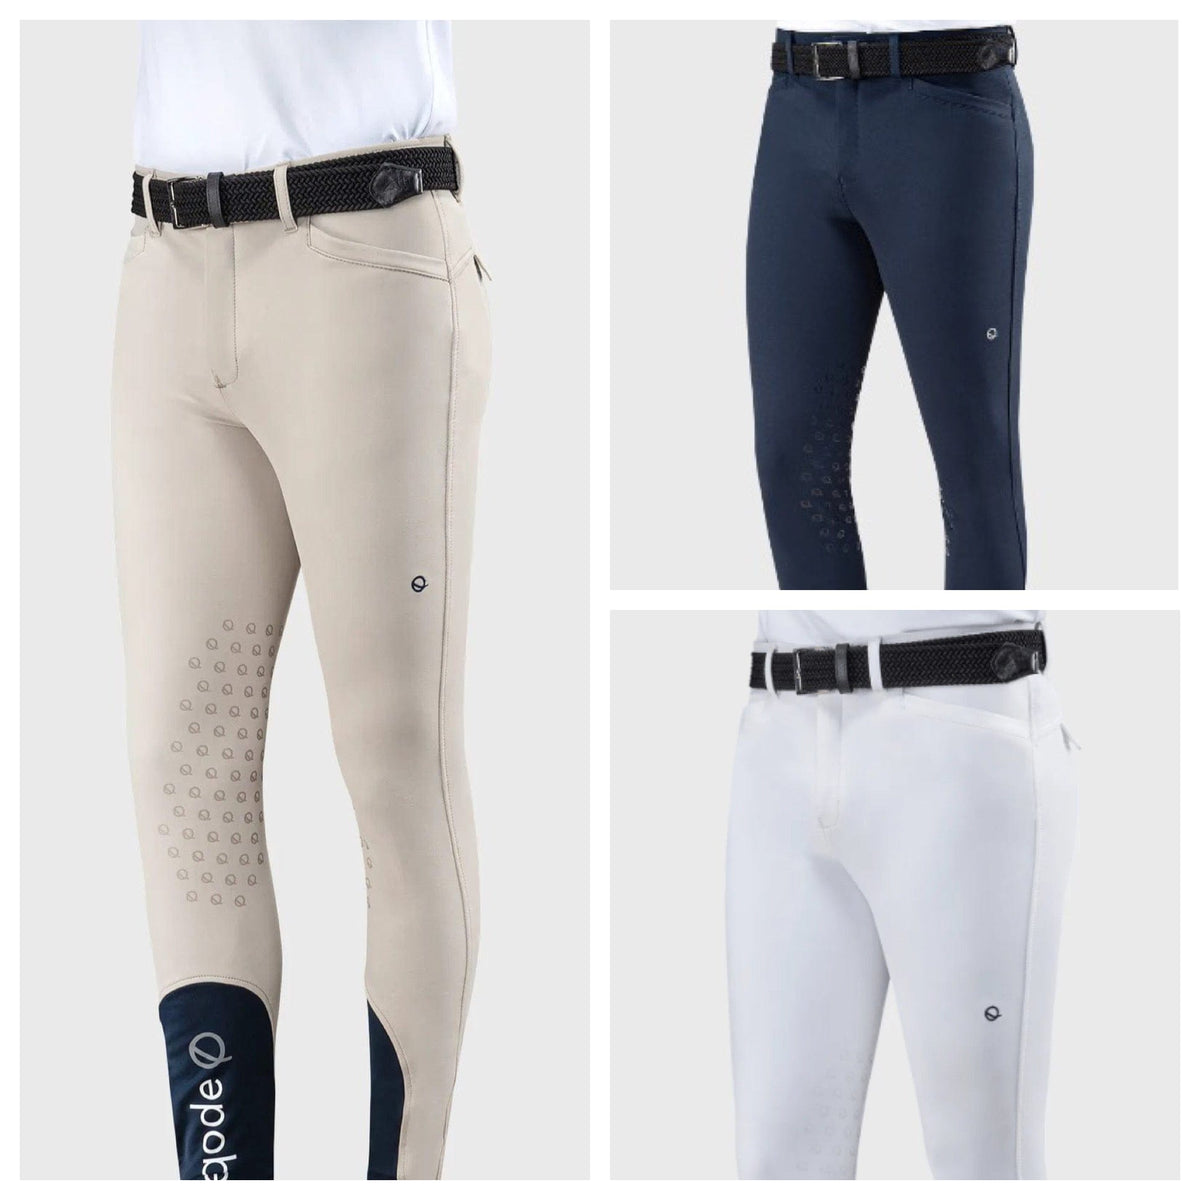 EQODE By Equiline Breeches EQODE- Men's Breeches w/Knee Grip equestrian team apparel online tack store mobile tack store custom farm apparel custom show stable clothing equestrian lifestyle horse show clothing riding clothes horses equestrian tack store